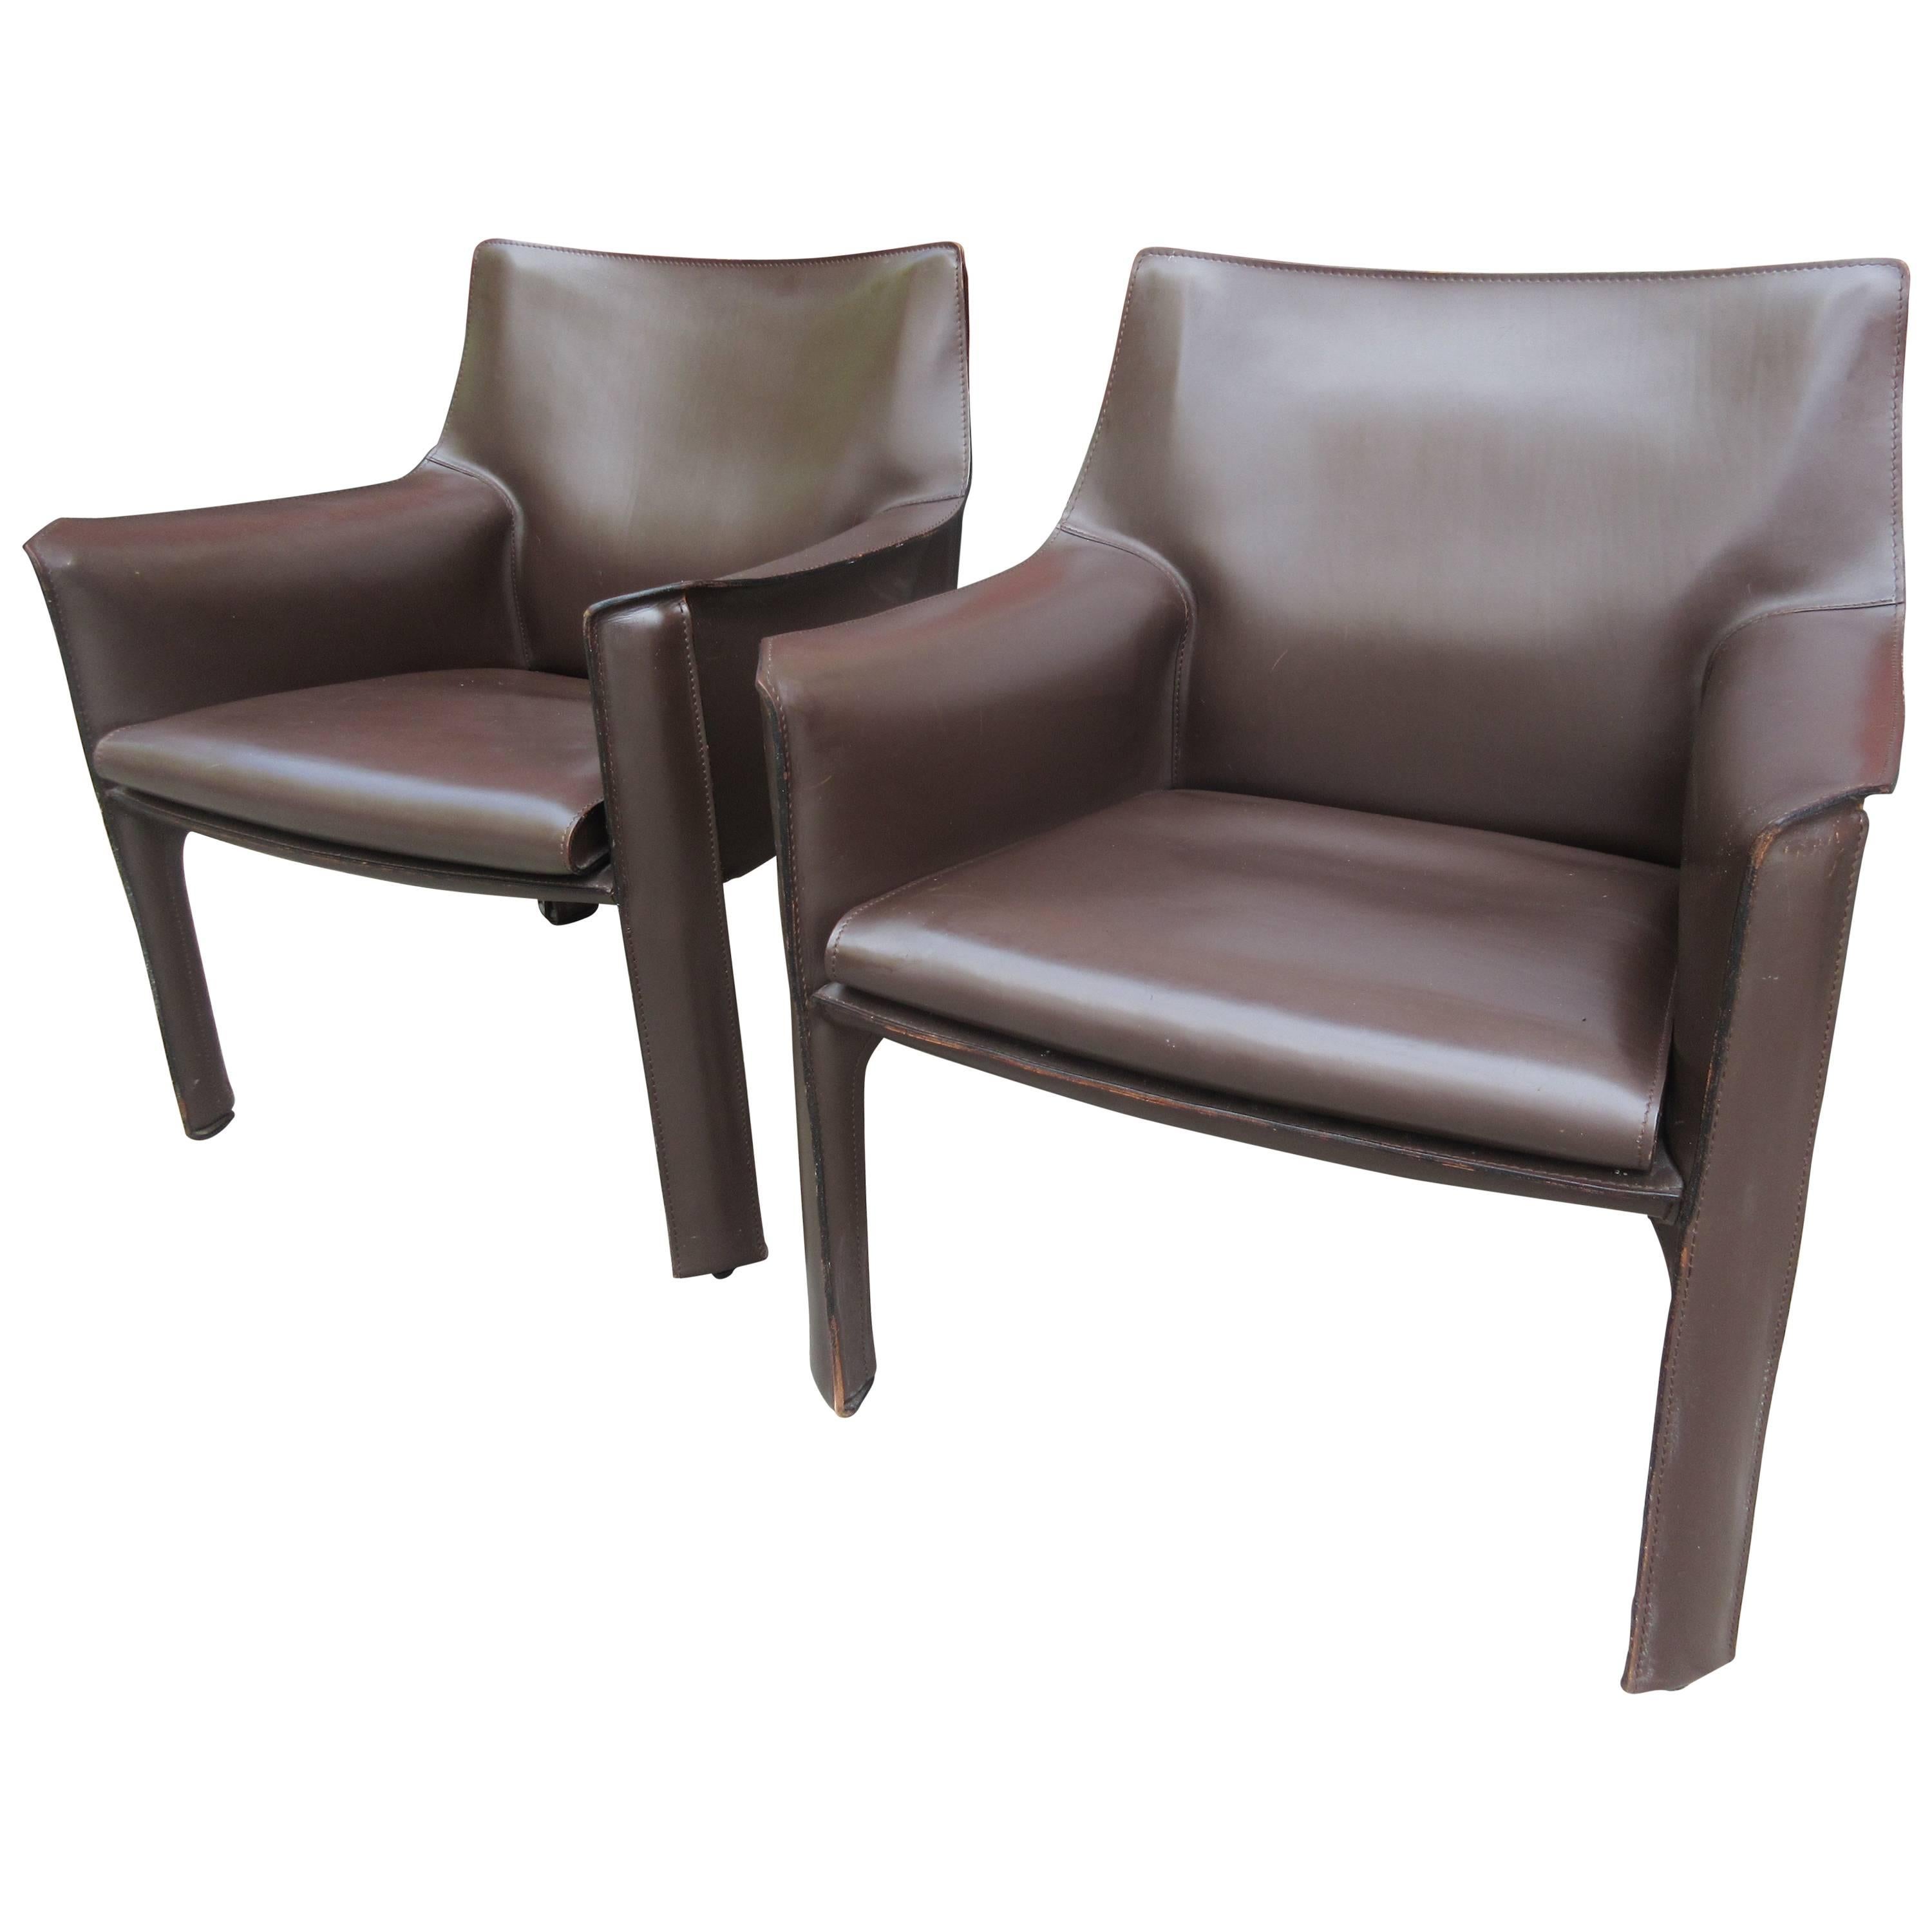 Mario Bellini Cab Lounge Chairs for Cassina in Chocolate Leather